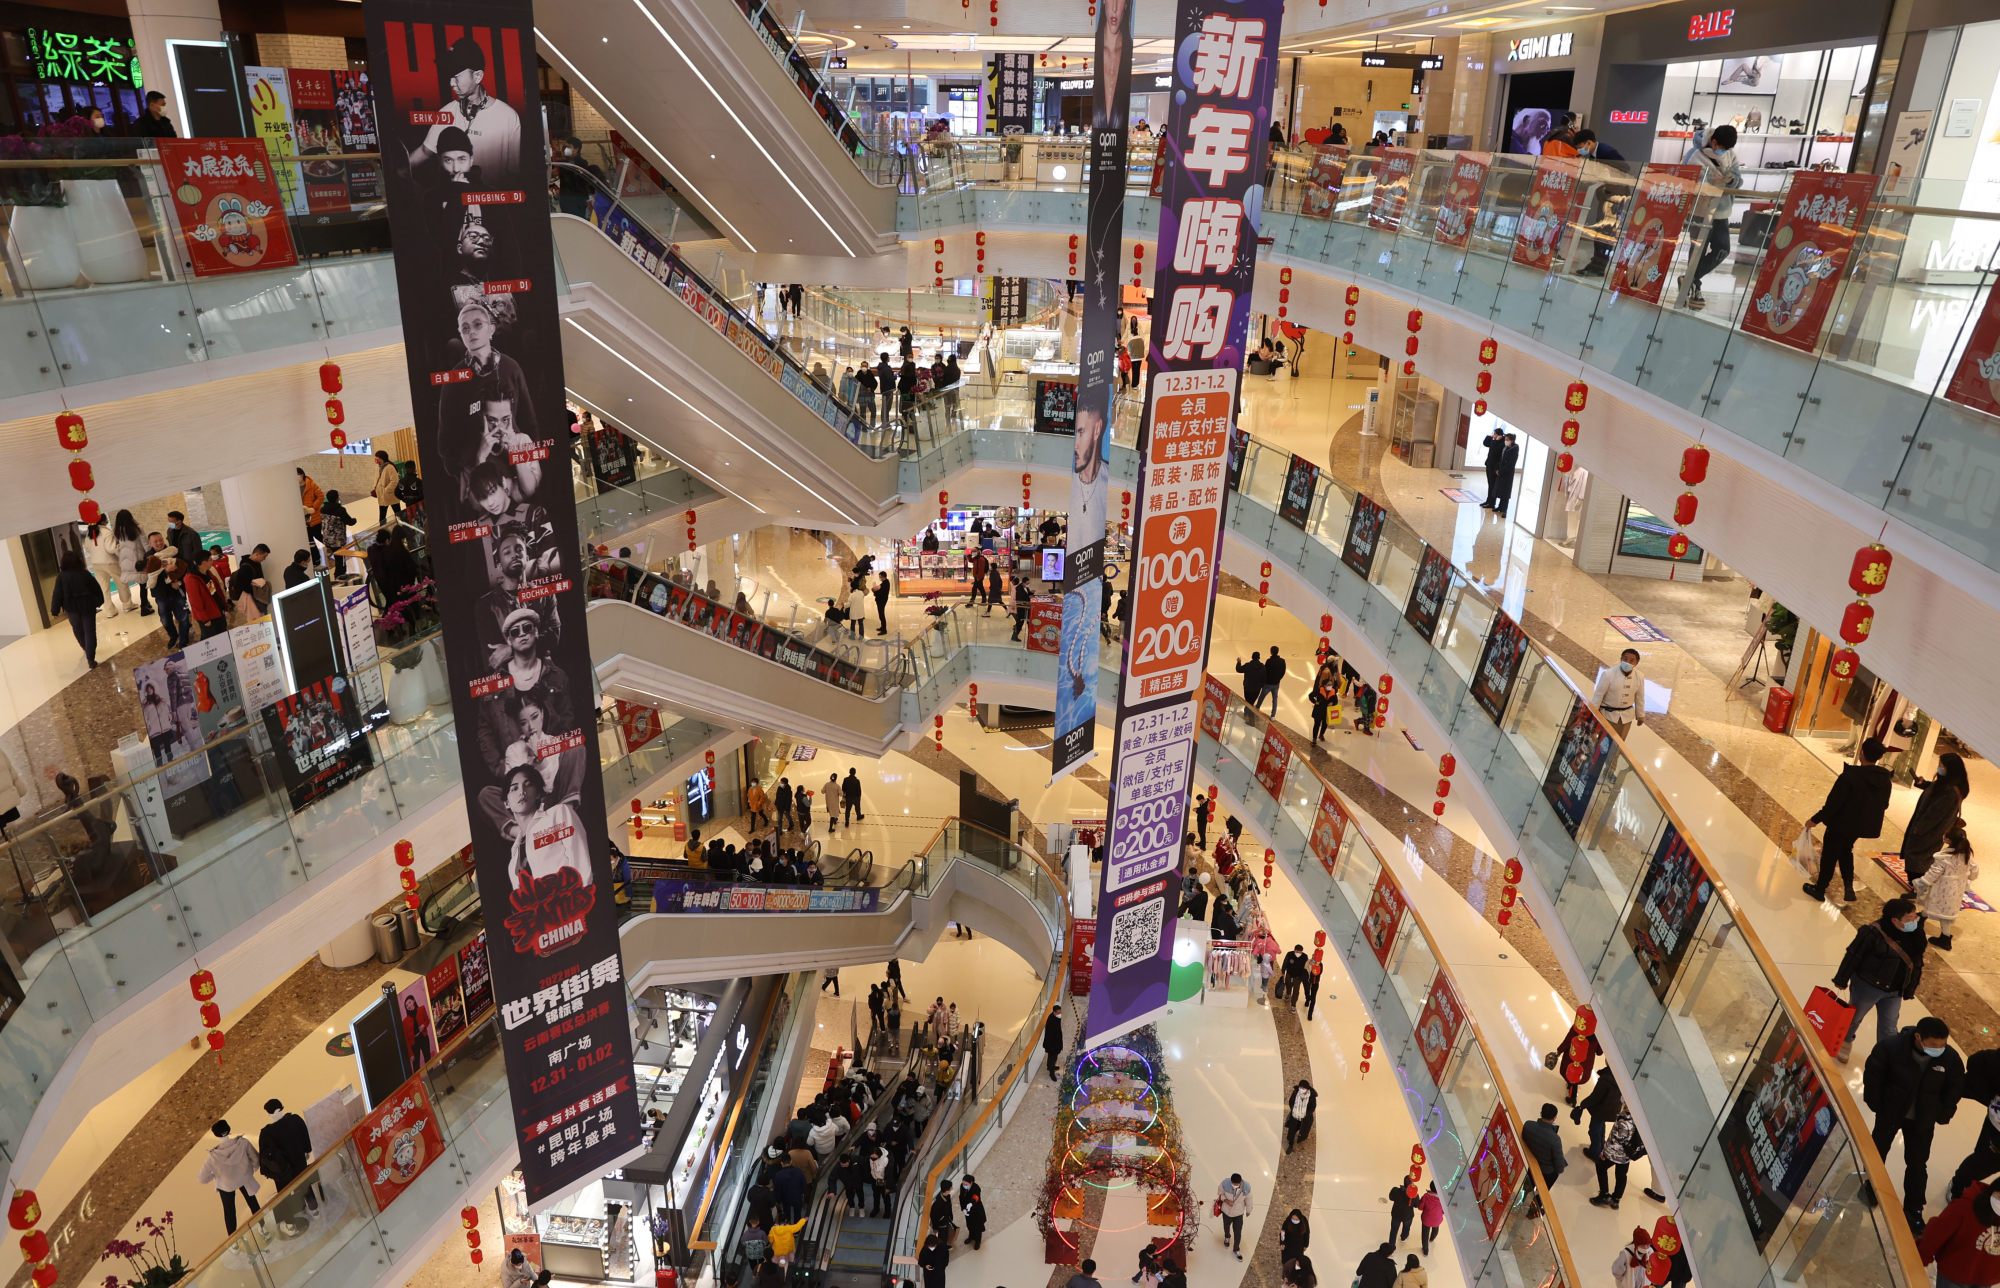 A shopping centre in Kunming, in southwest China’s Yunnan province, on January 1. There is widespread anxiety in the West that an illiberal China is becoming one of the world’s dominant powers. Photo: Xinhua